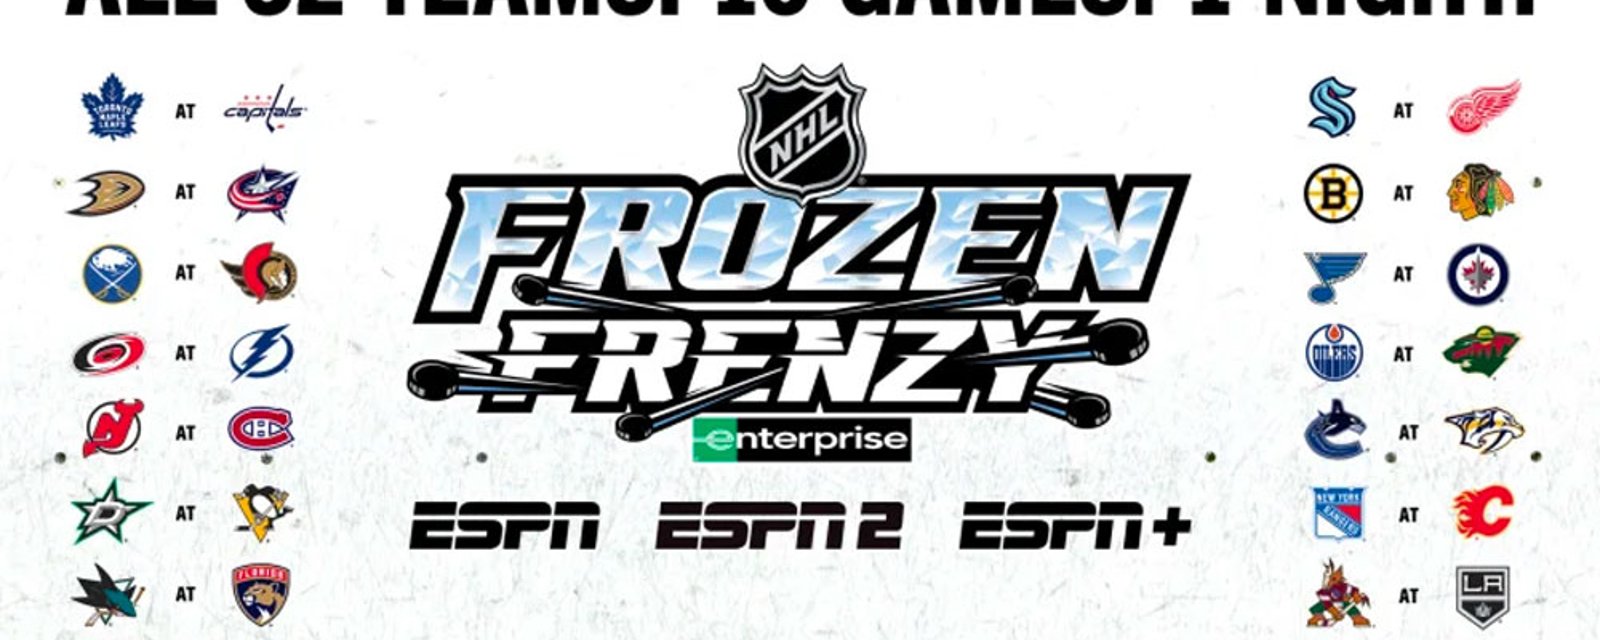 ESPN's big “Frozen Frenzy” broadcast this evening hits a major snag